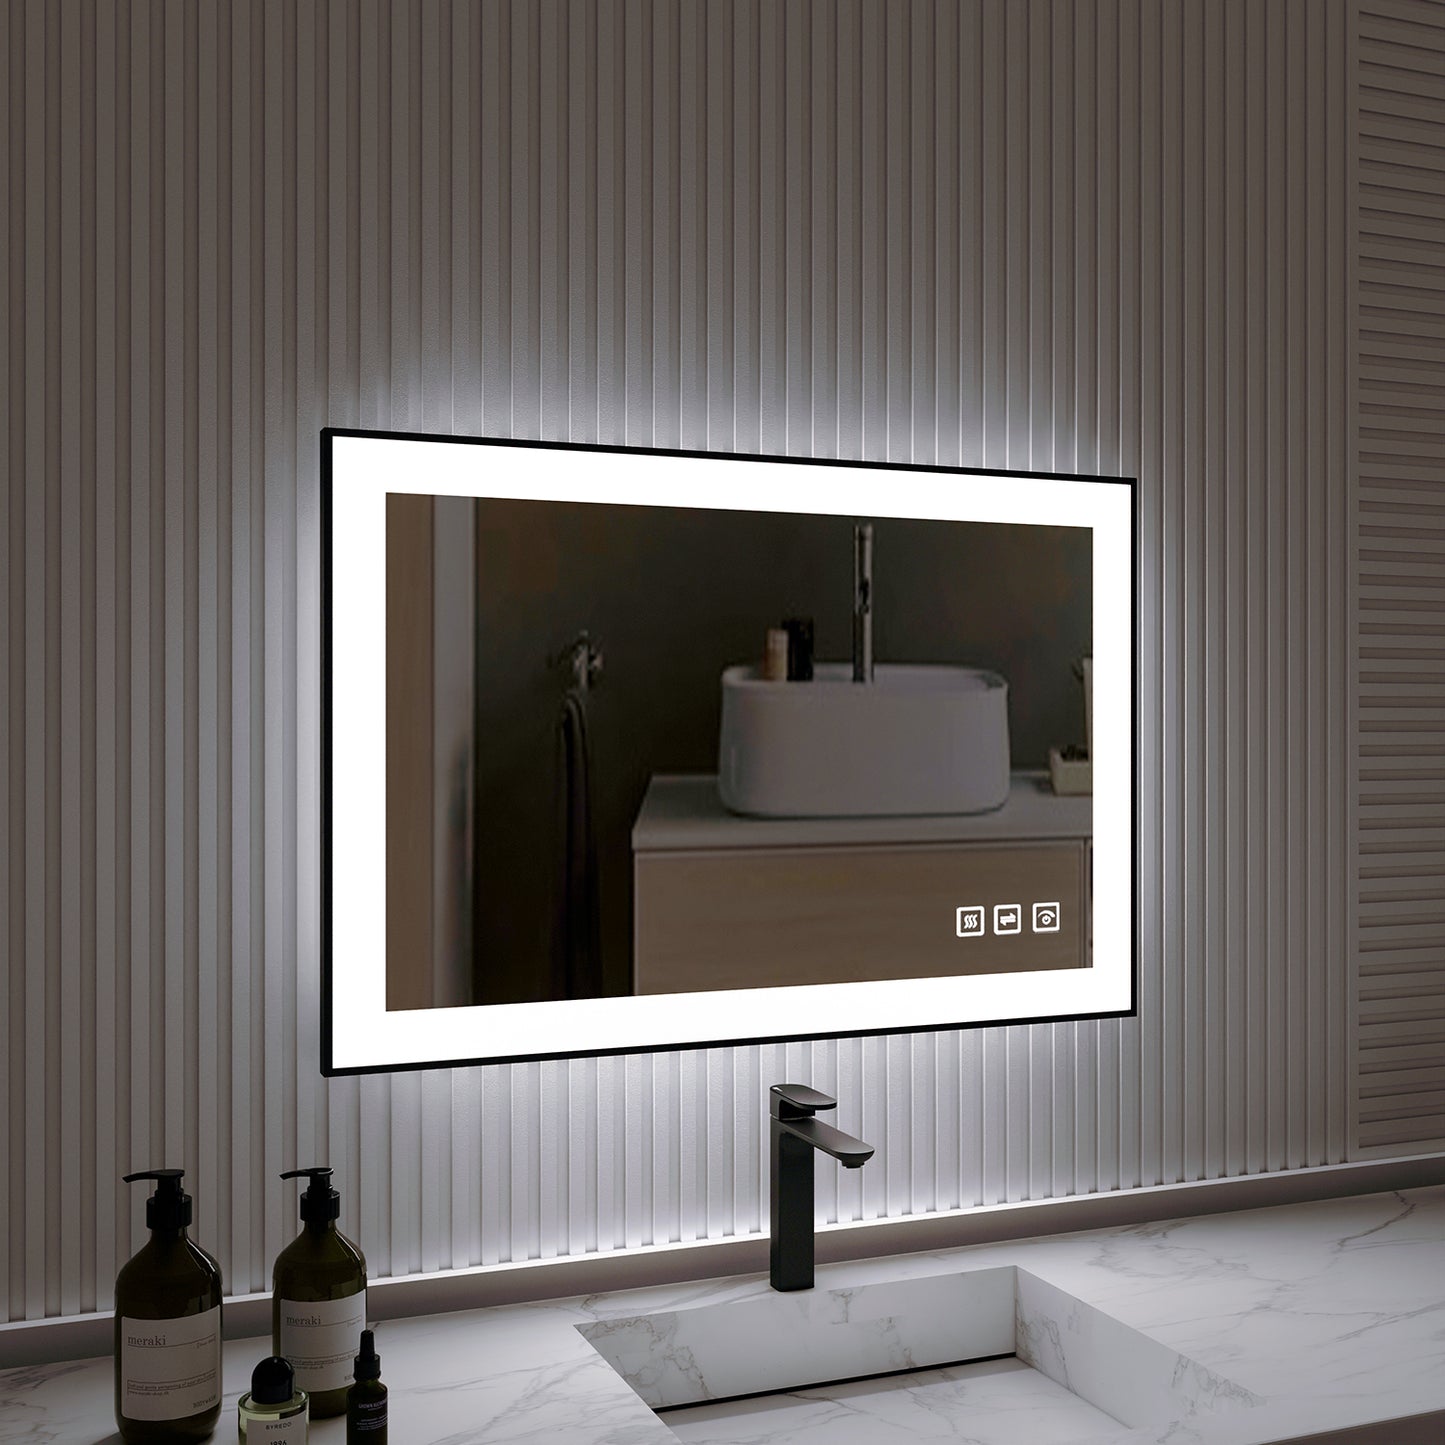 Waterpar® 36 in. W x 24 in. H Rectangular Framed Anti-Fog LED Wall Bathroom Vanity Mirror in Black with Backlit and Front Light